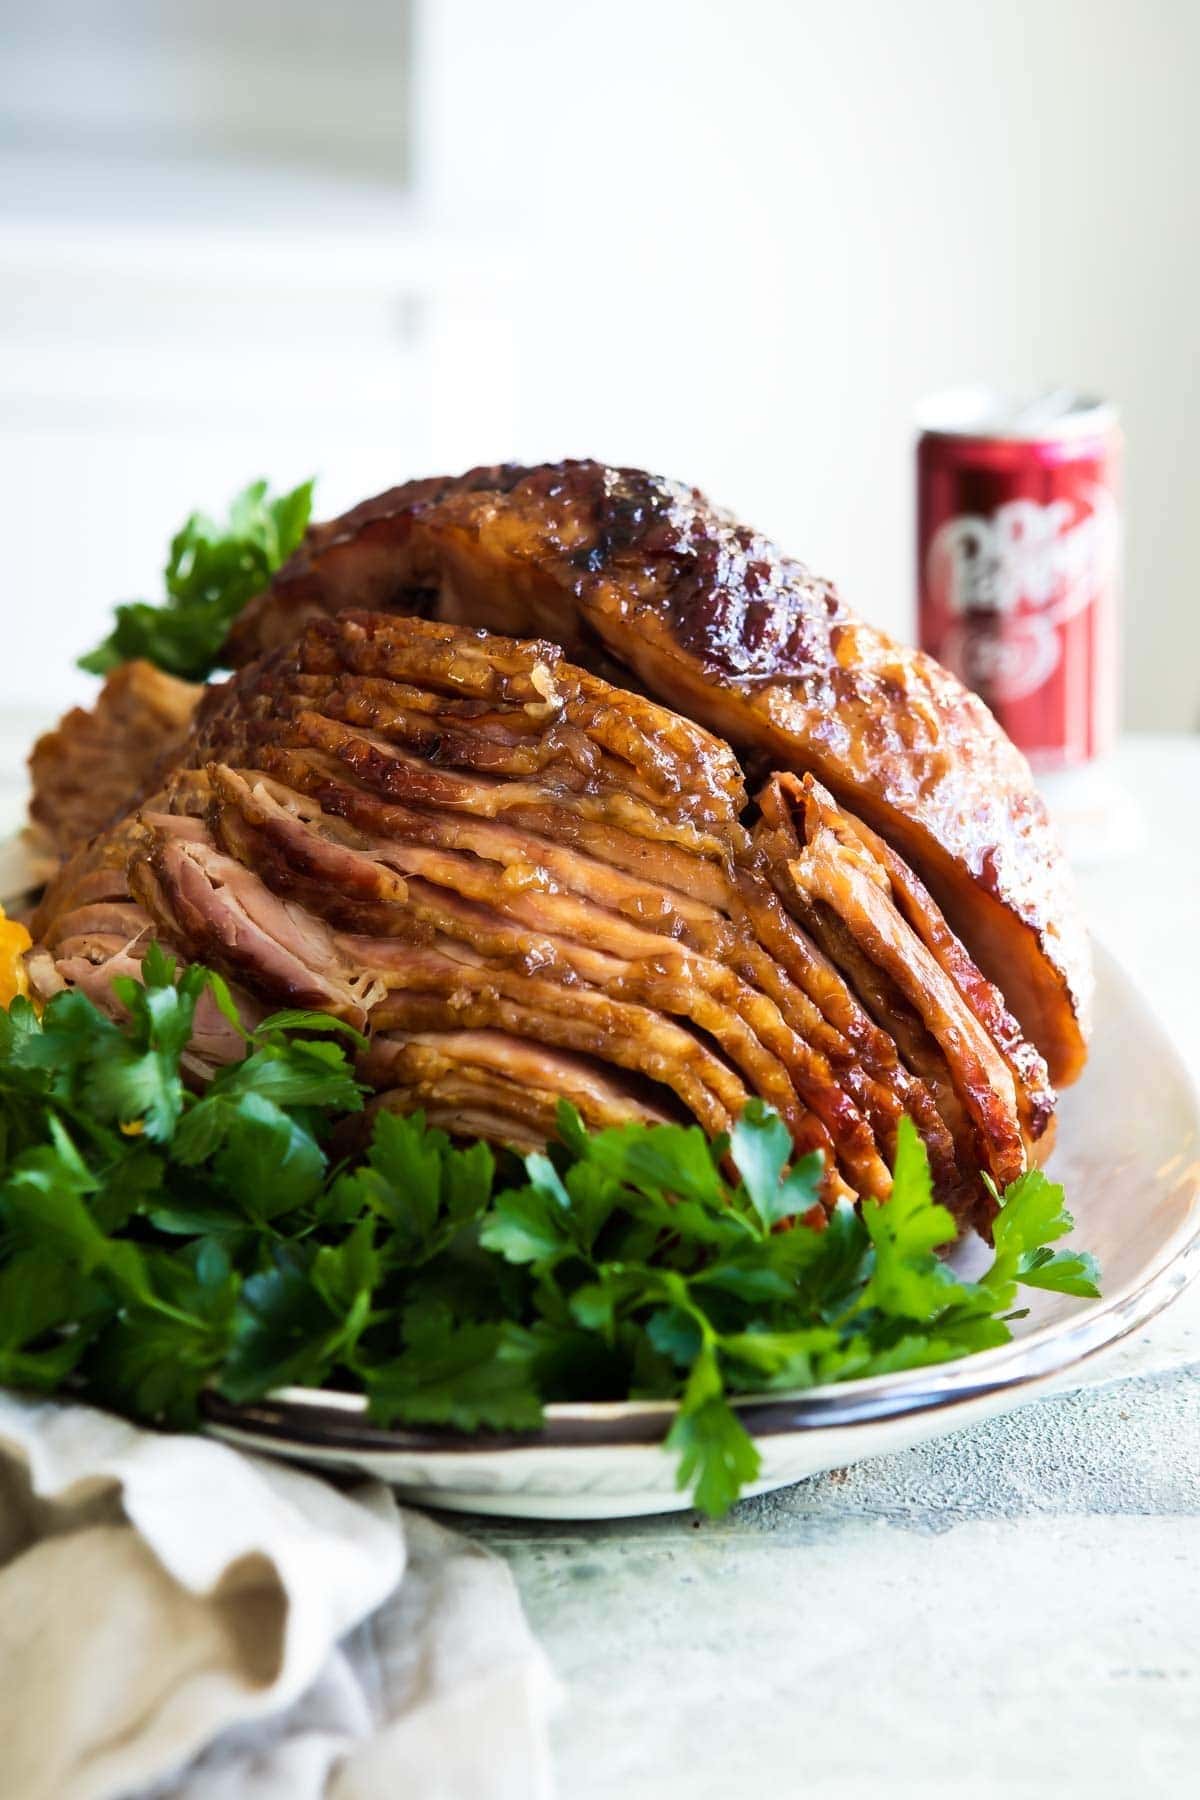 Thinly sliced glazed ham garnished with parsley leaves and a can of Dr. Pepper in the background.